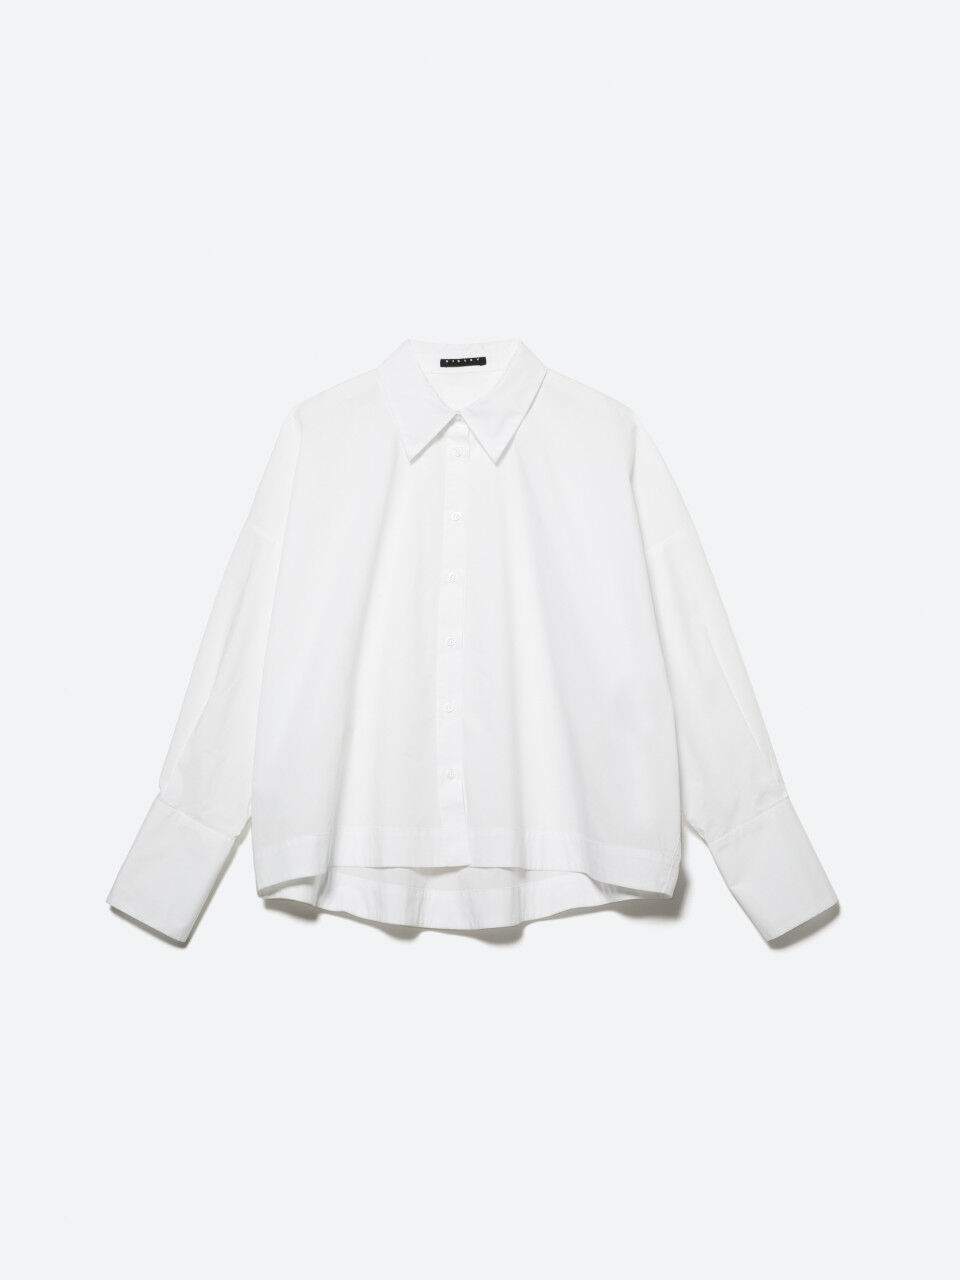 Women's Shirts and Blouses 2022 Collection | Sisley World